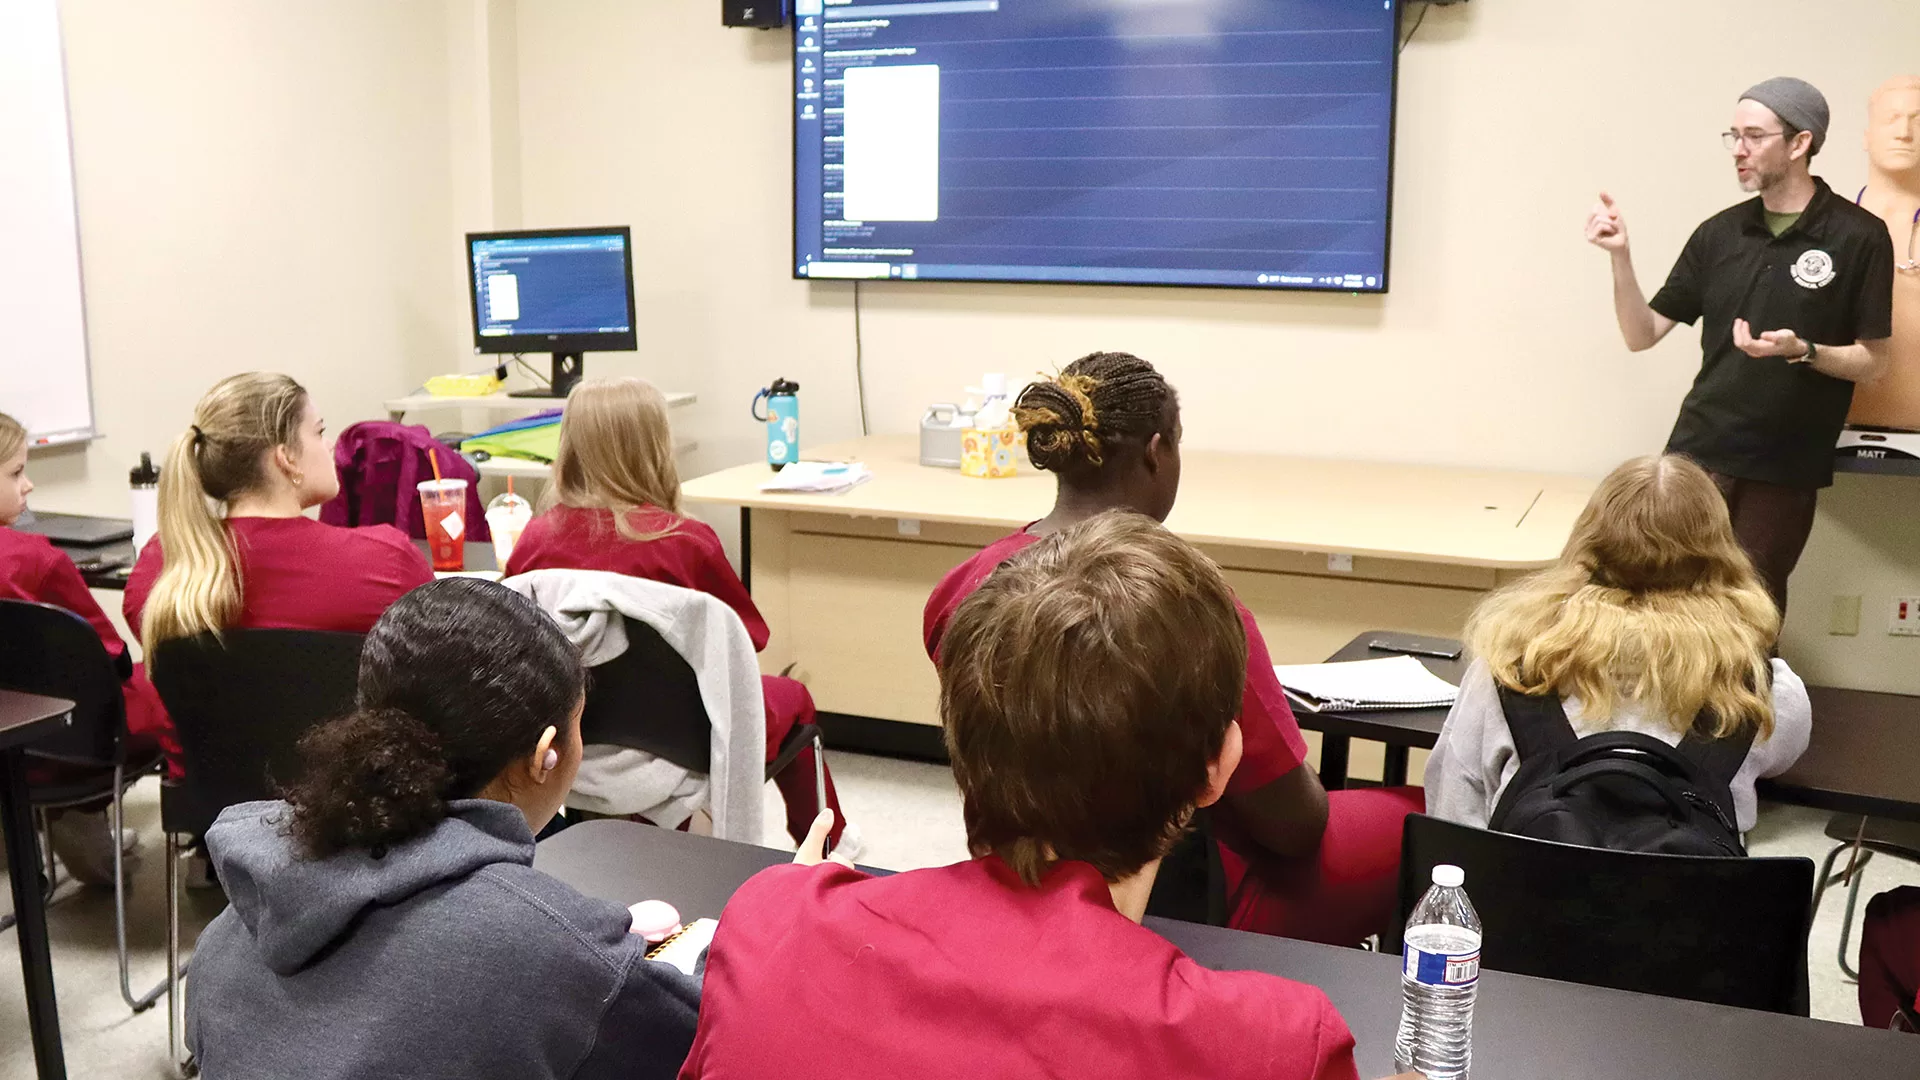 Daniel O’Neill, patient simulation information coordinator at STCC, talks to the students